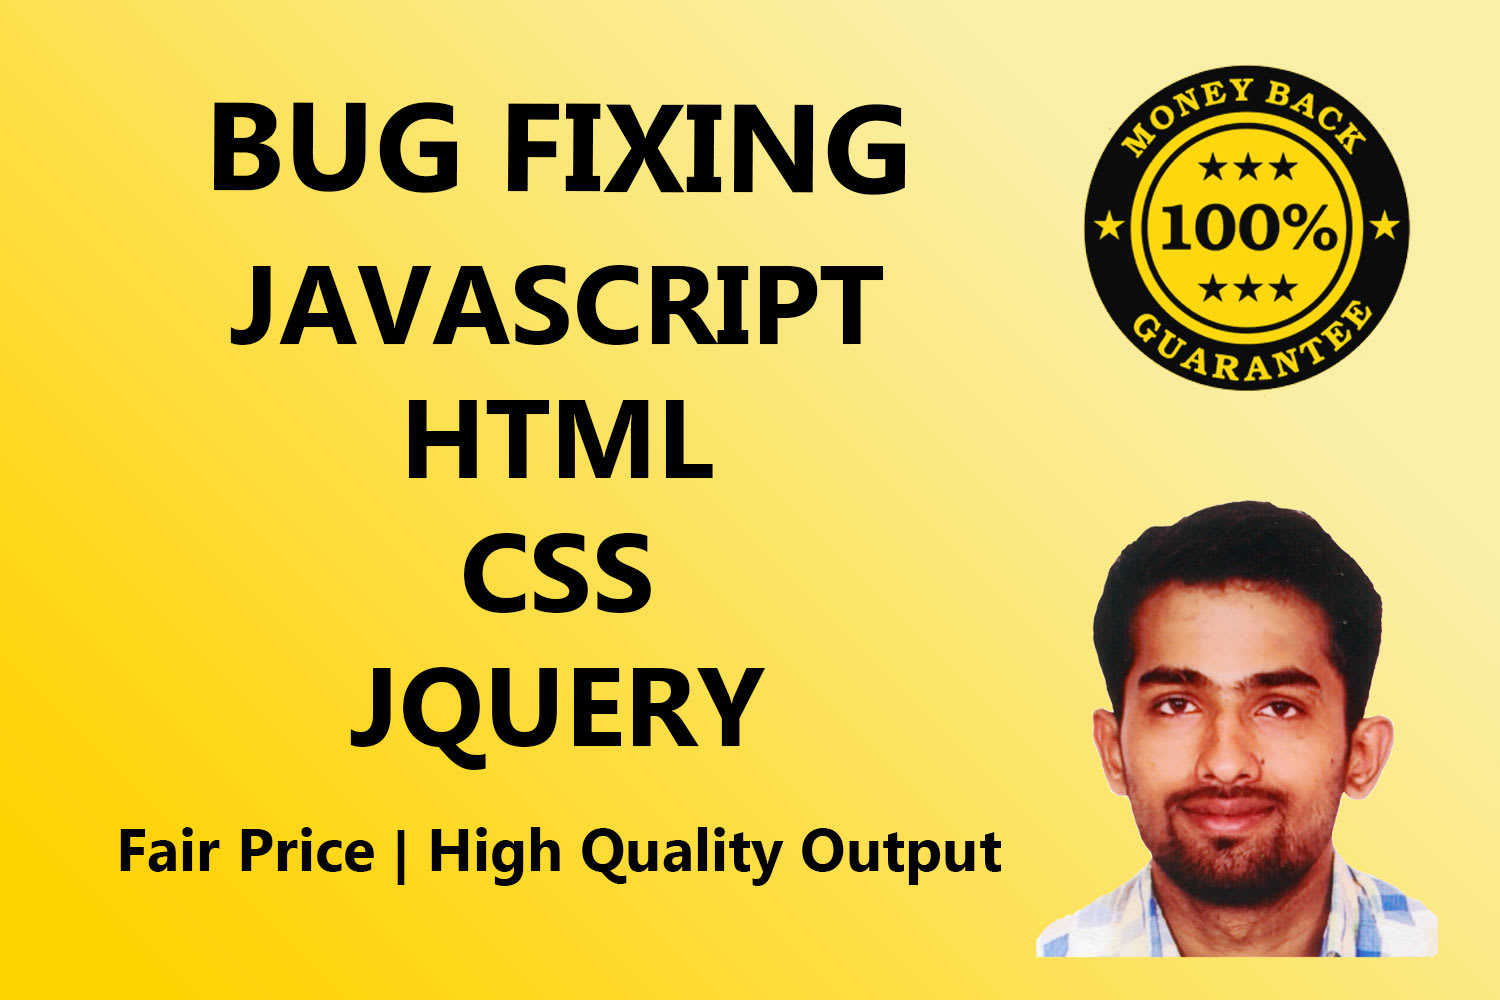 Fix javascript, html, css bugs in 5 dollar hourly rate by Sudeshtechy |  Fiverr